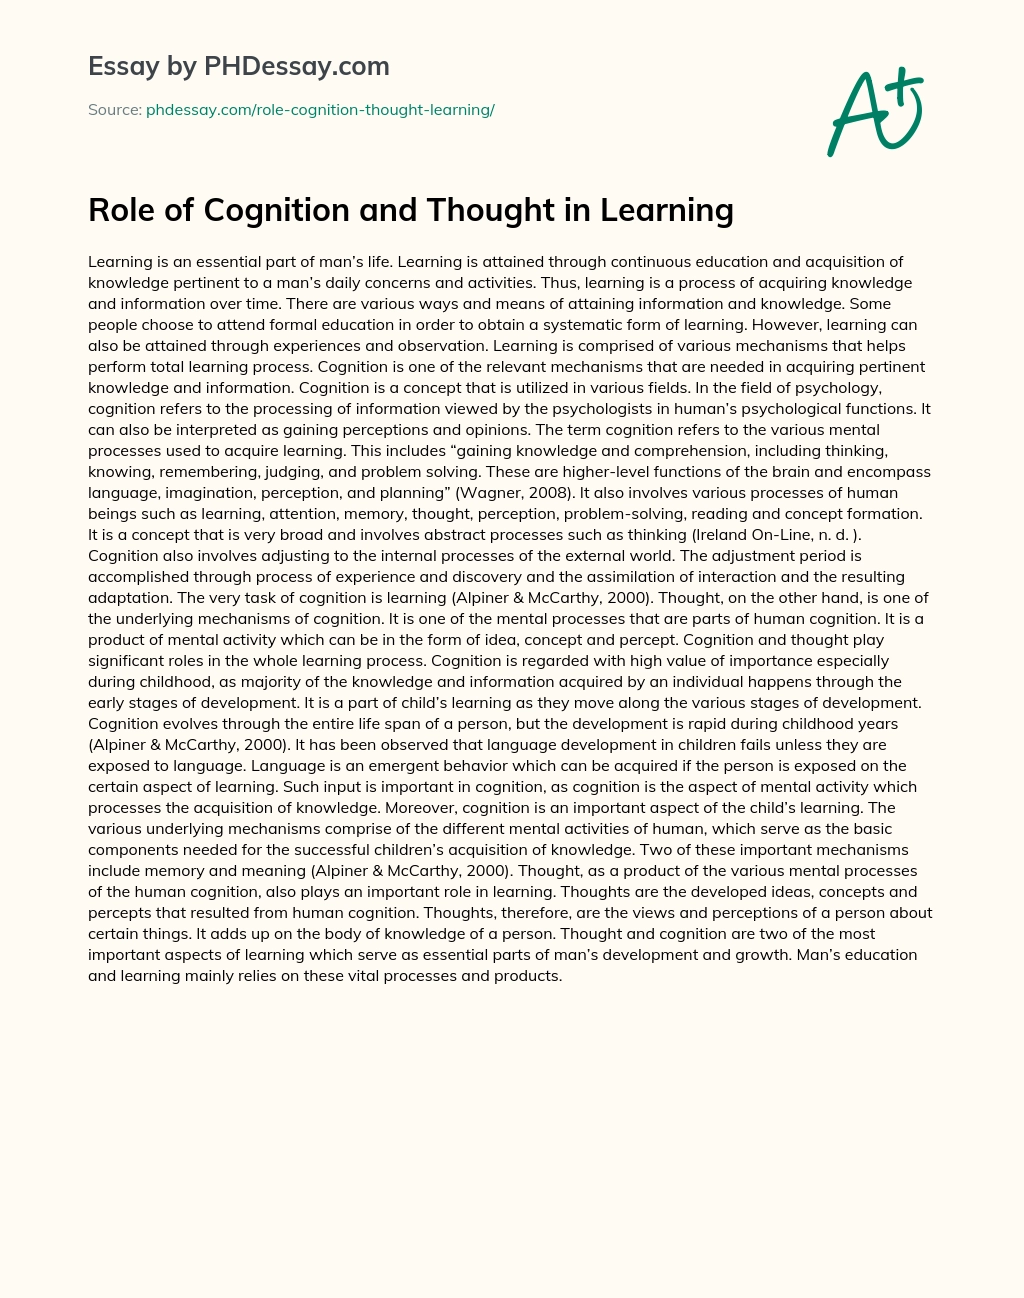 Role of Cognition and Thought in Learning essay